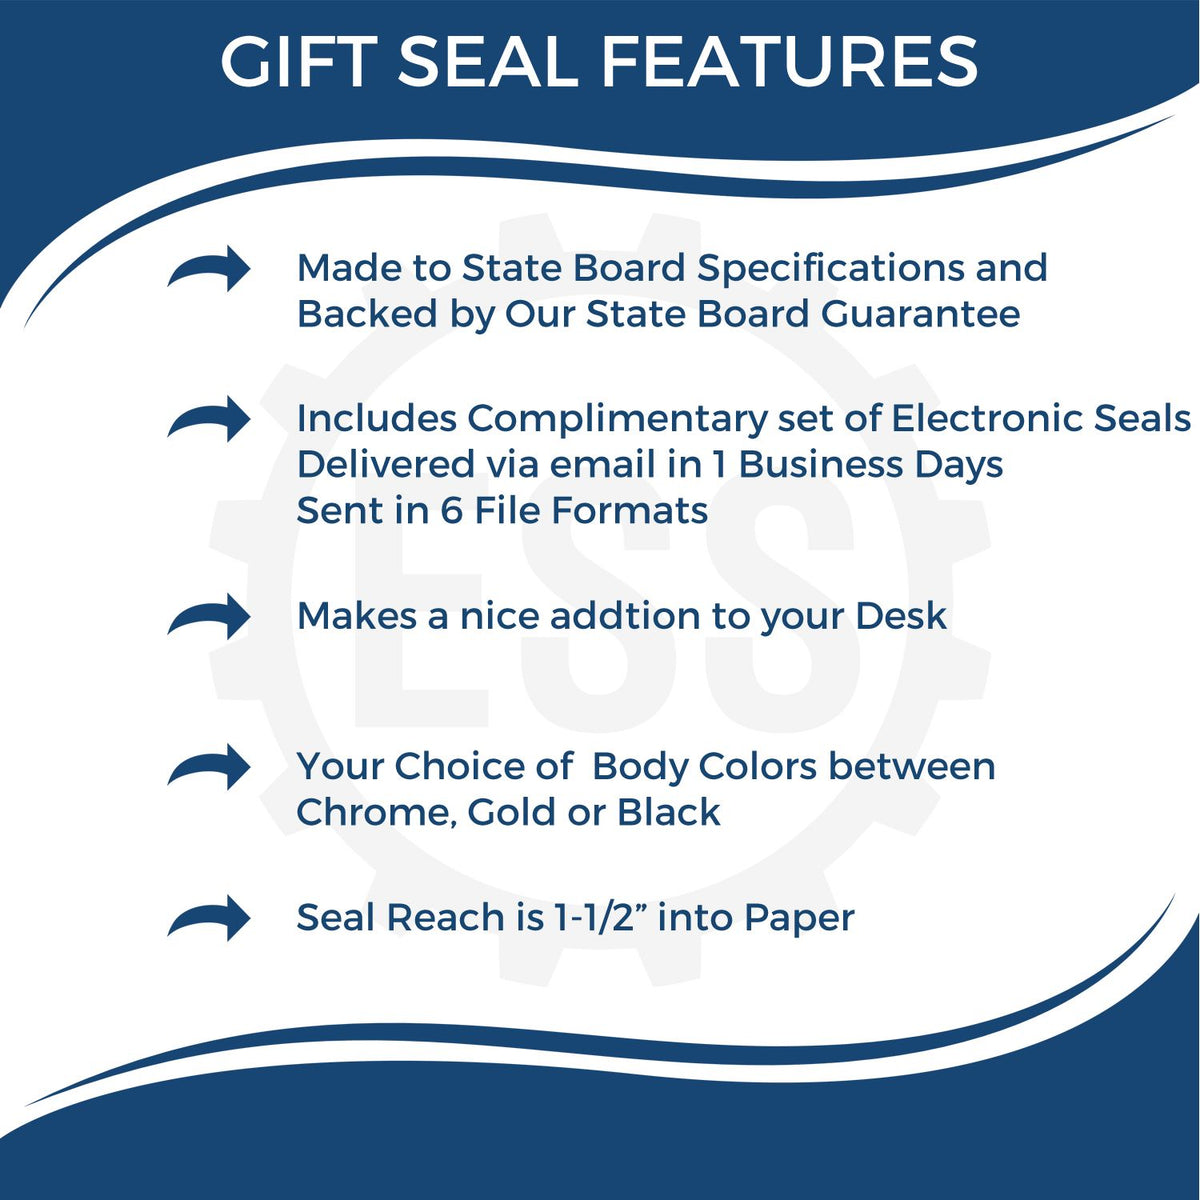 A picture of an infographic highlighting the selling points for the Gift New Jersey Land Surveyor Seal